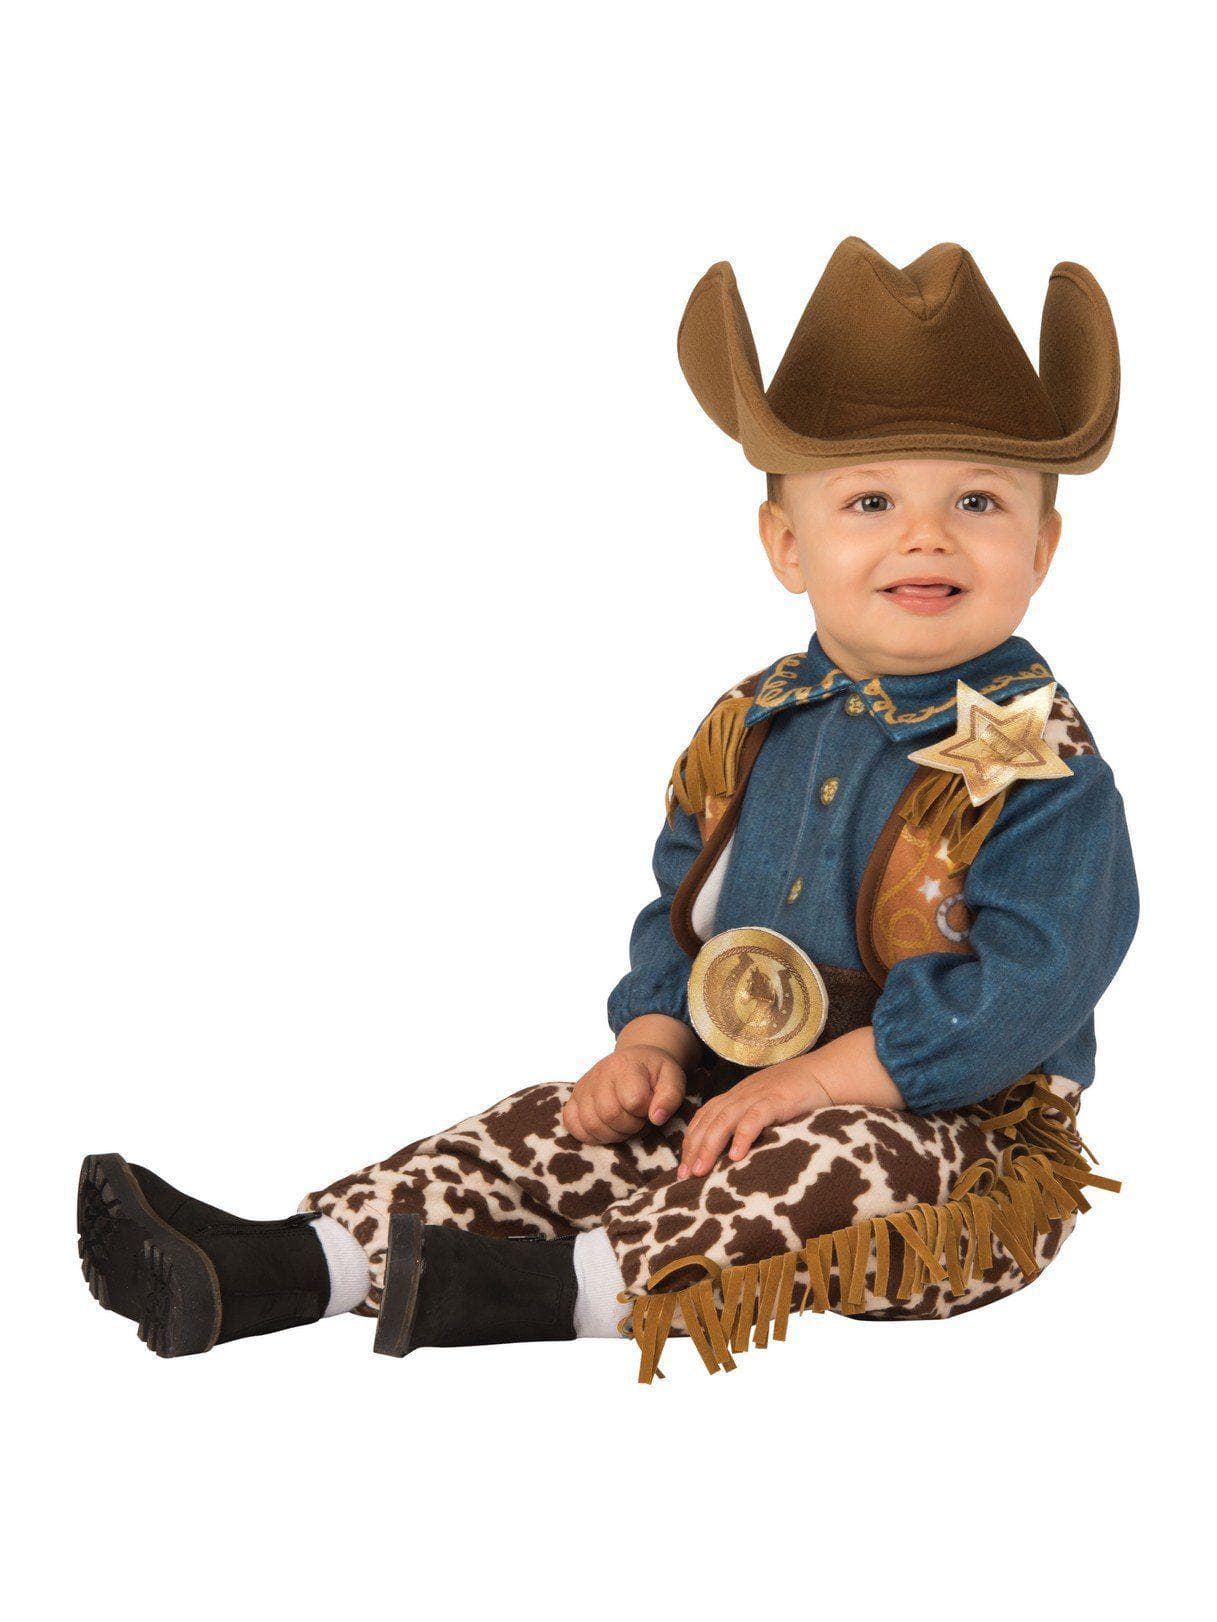 Baby/Toddler Little Cowboy Costume - costumes.com